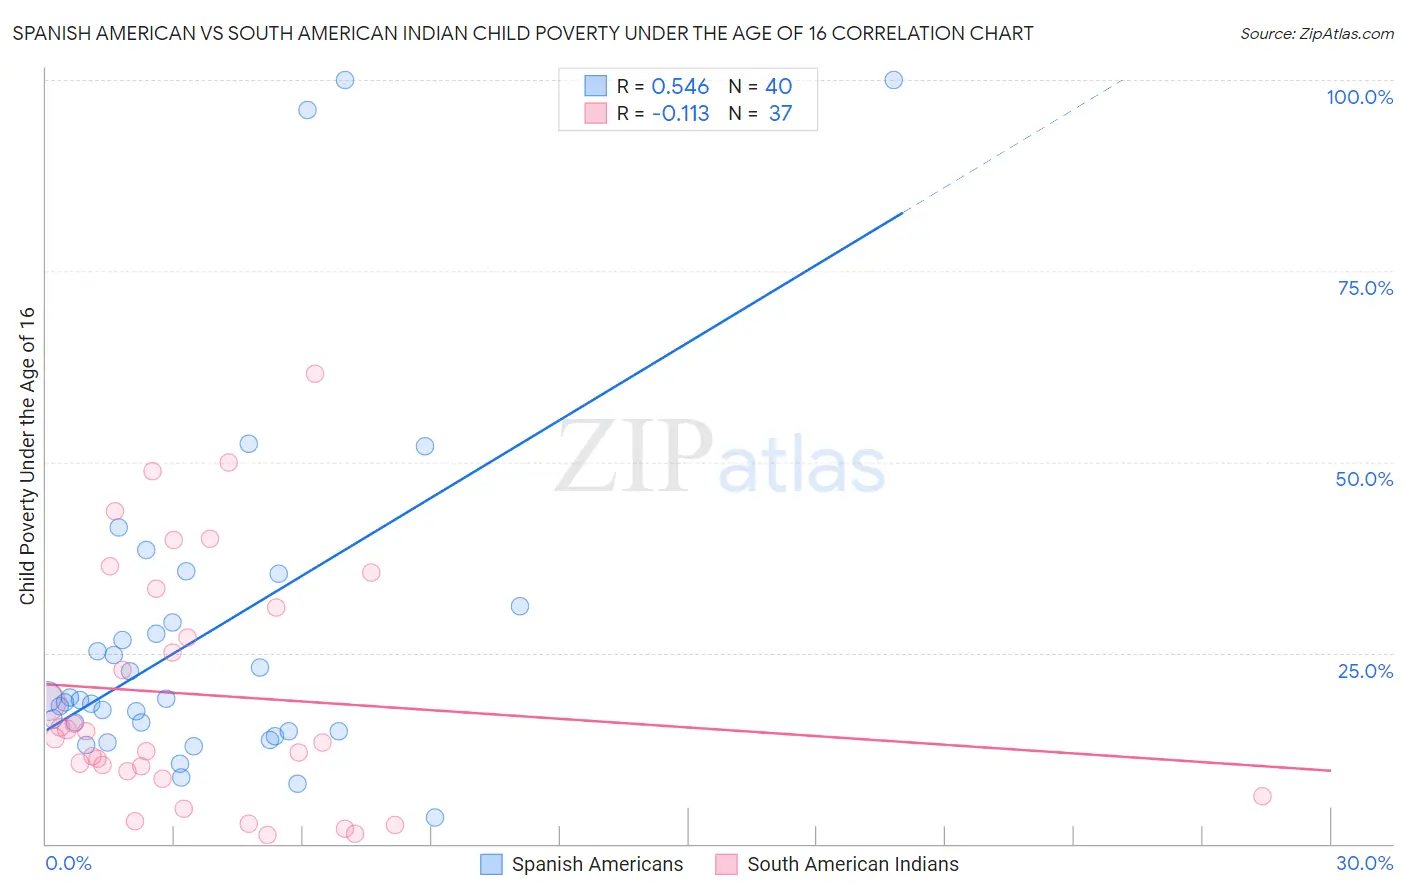 Spanish American vs South American Indian Child Poverty Under the Age of 16